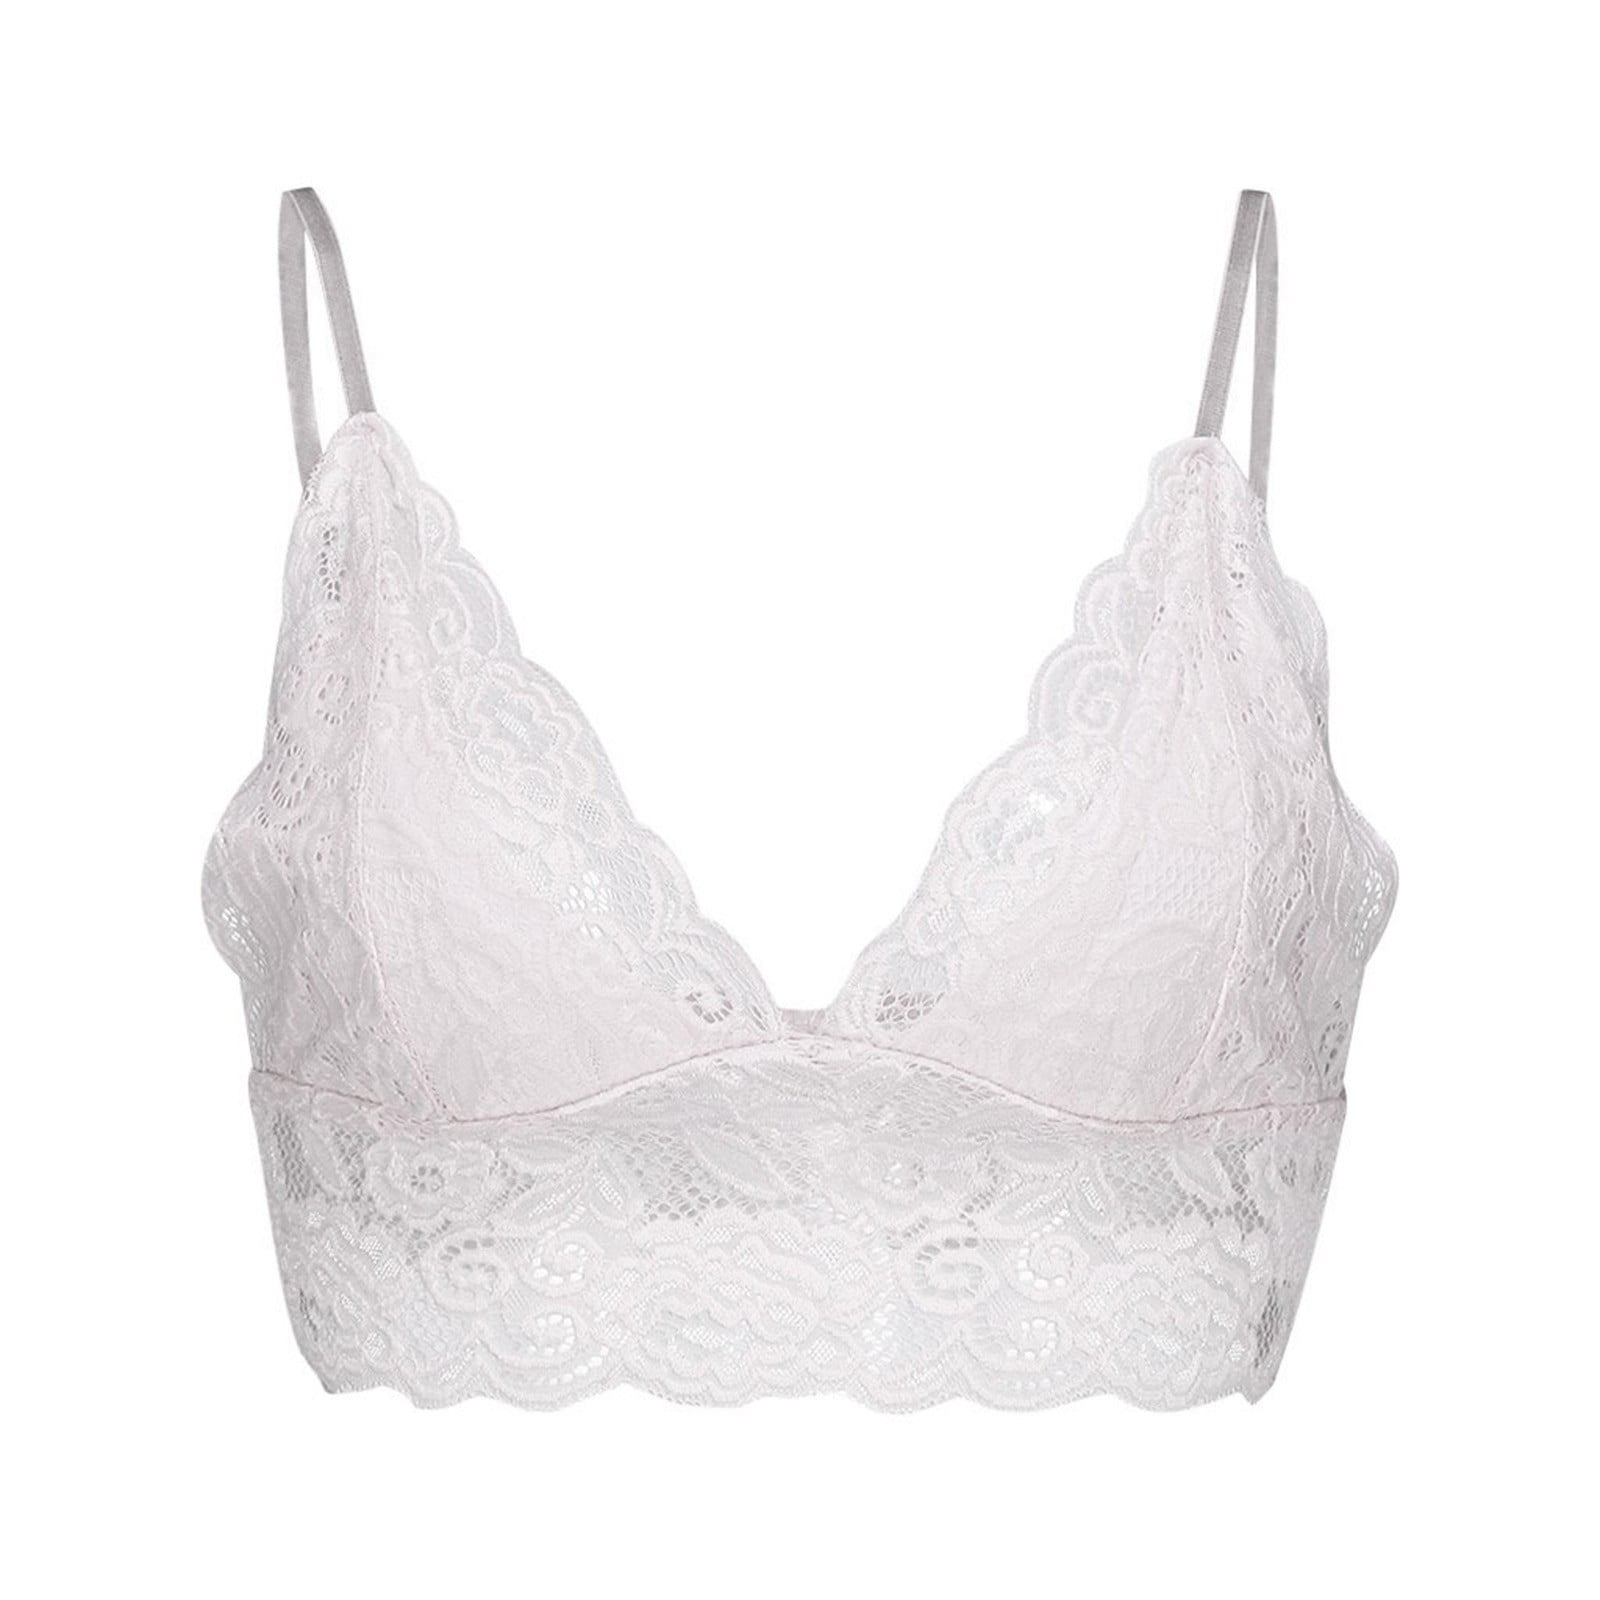 Xysaqa Women's Deep V Neck Lace Bra, Solid Comfy Wireless Lace